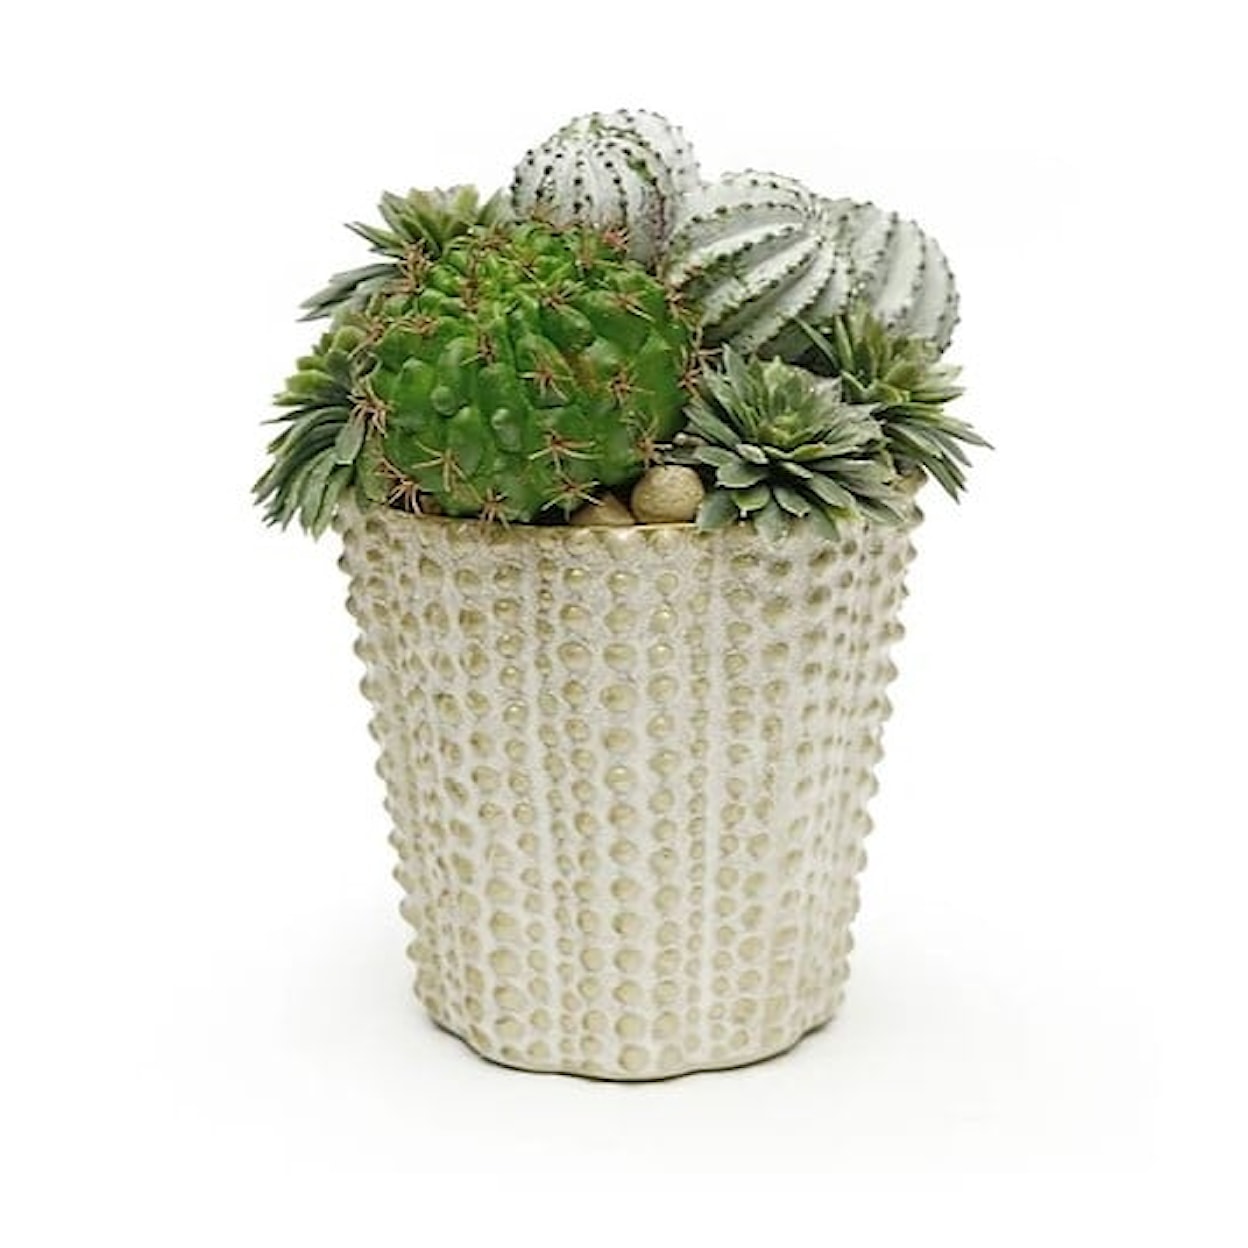 The Ivy Guild Succulents Nilly Pot Cactus Mix